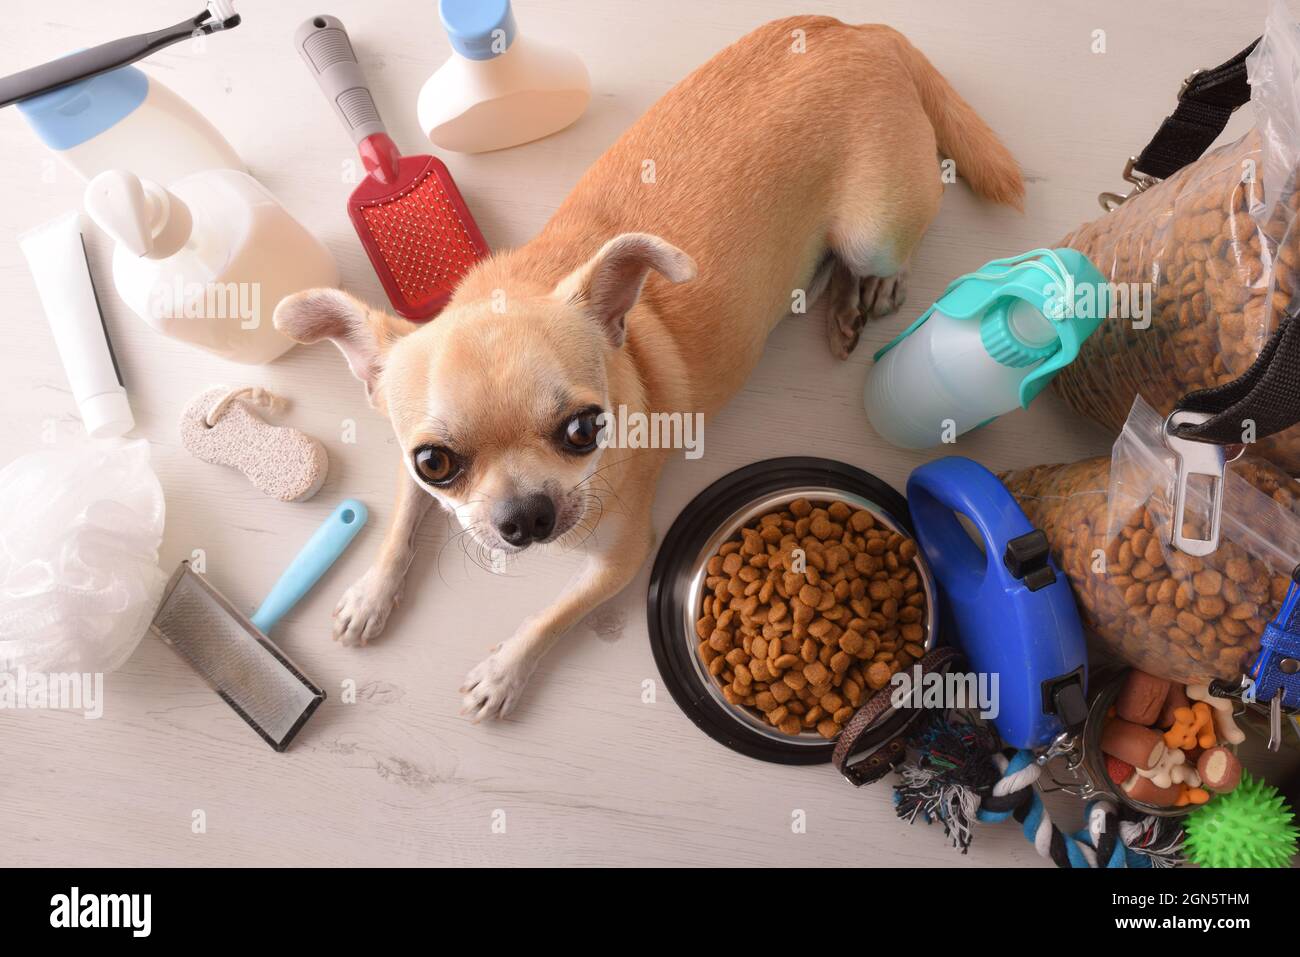 Food and accessories for walk, play and body care for the dog and chihuahua on wooden table. Elevated view. Horizontal composition. Stock Photo